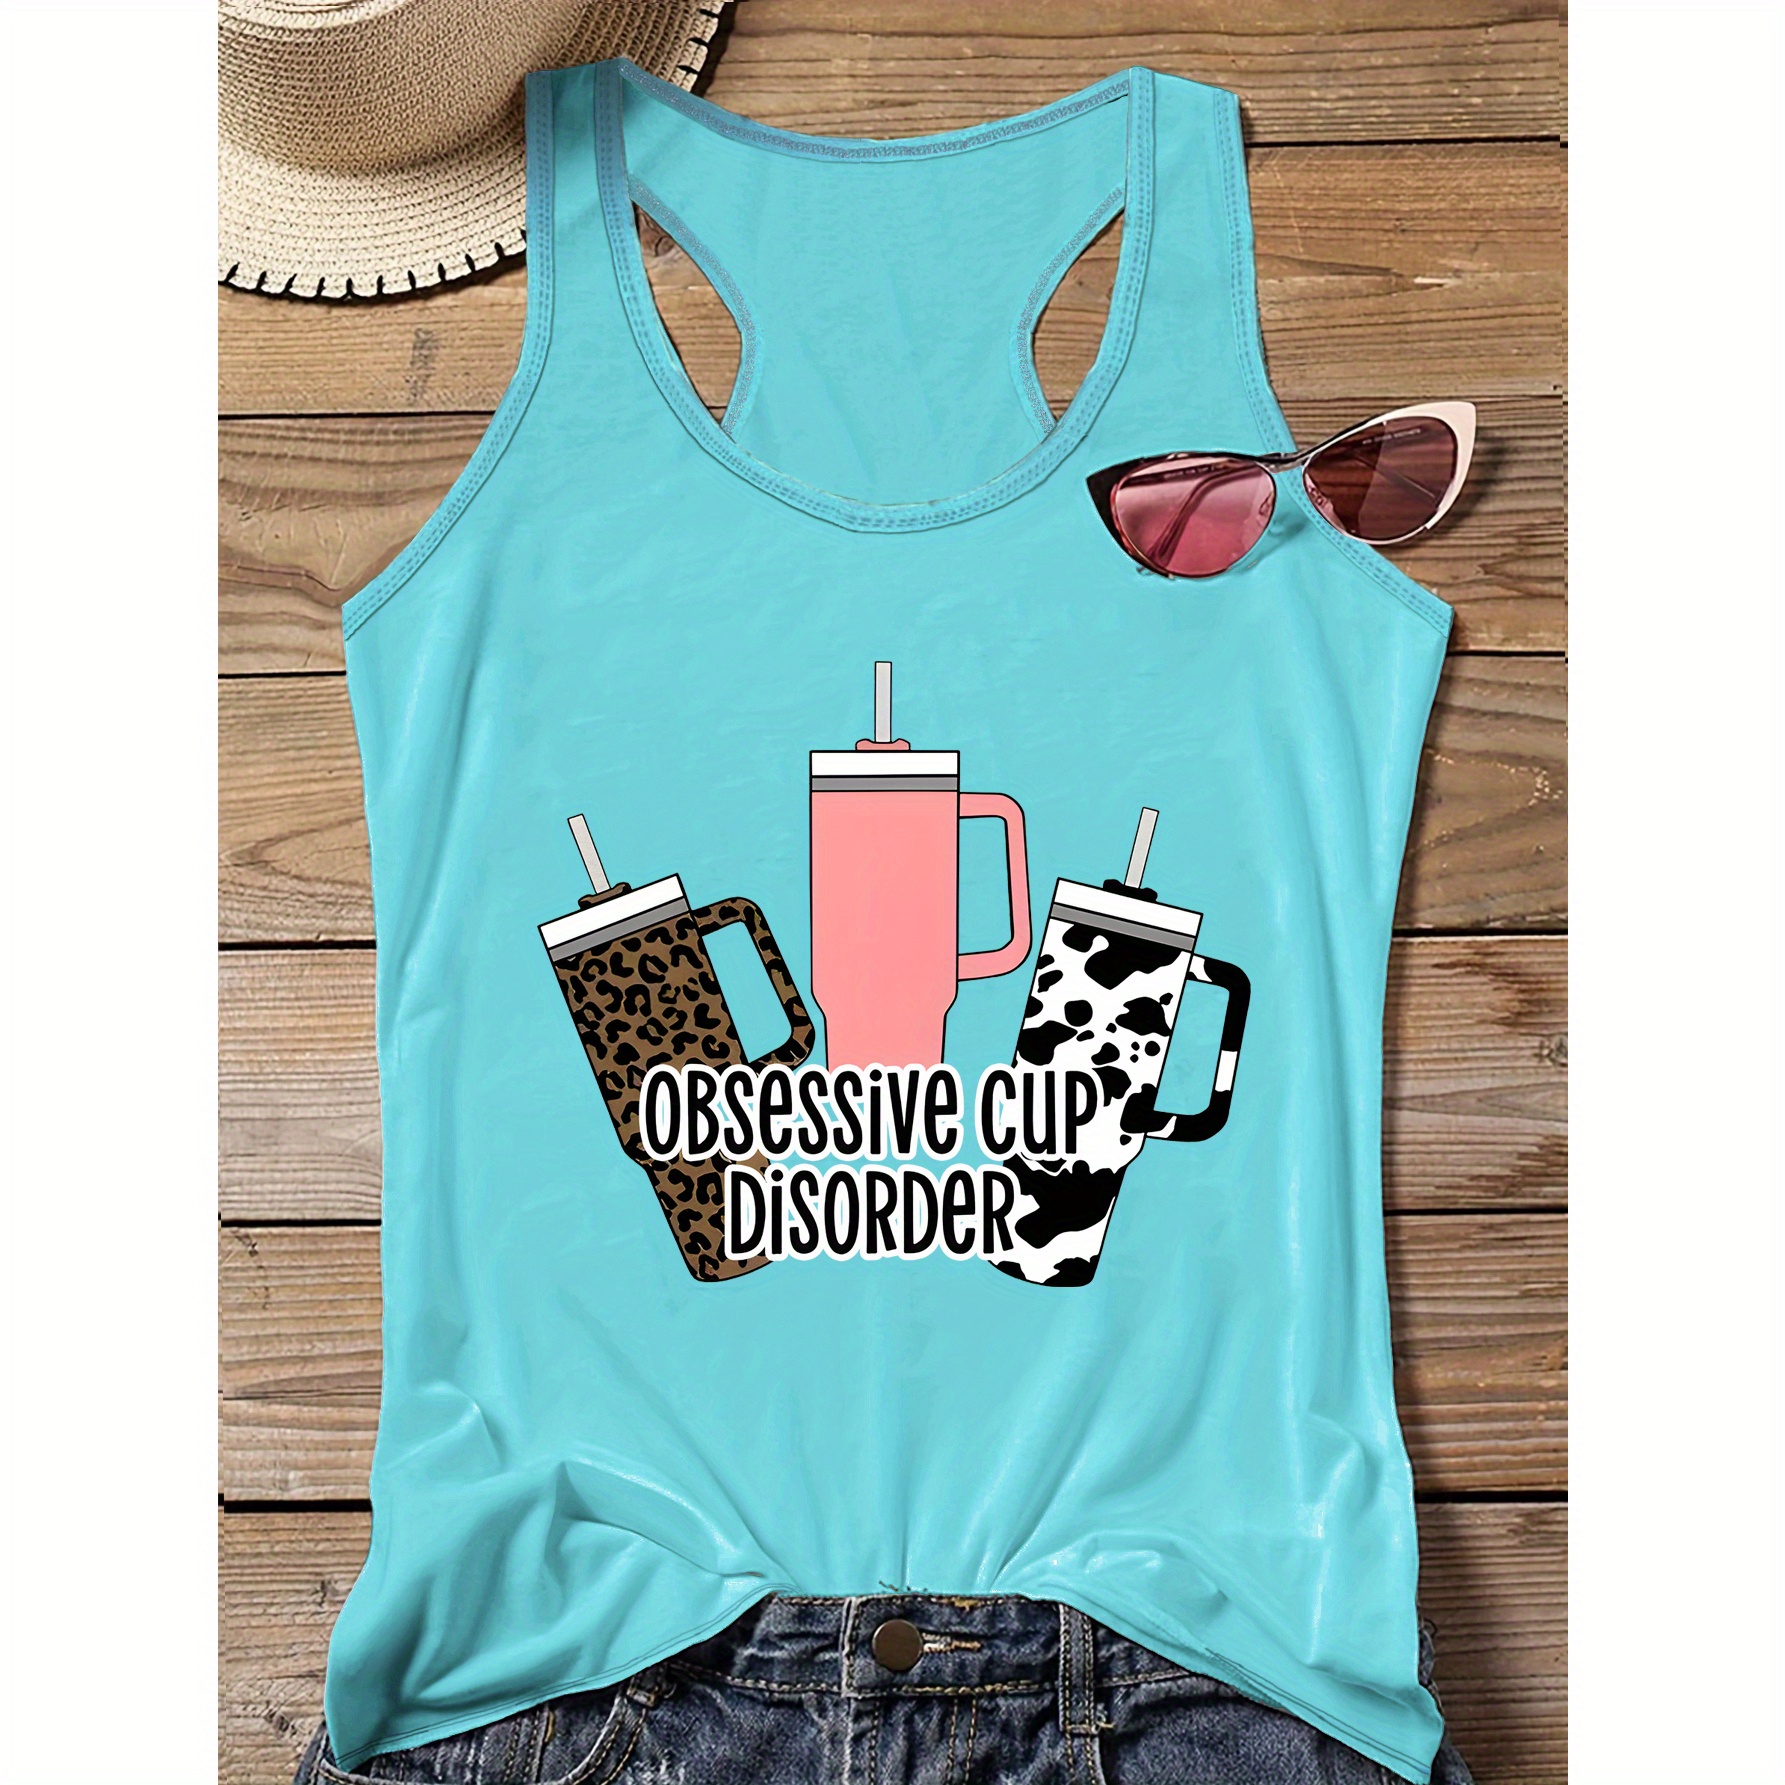 

Plus Size Casual Sporty Cup & Letter Print Racer Back Tank Top, Sleeveless Casual Top For Summer & Spring, Women's Clothing